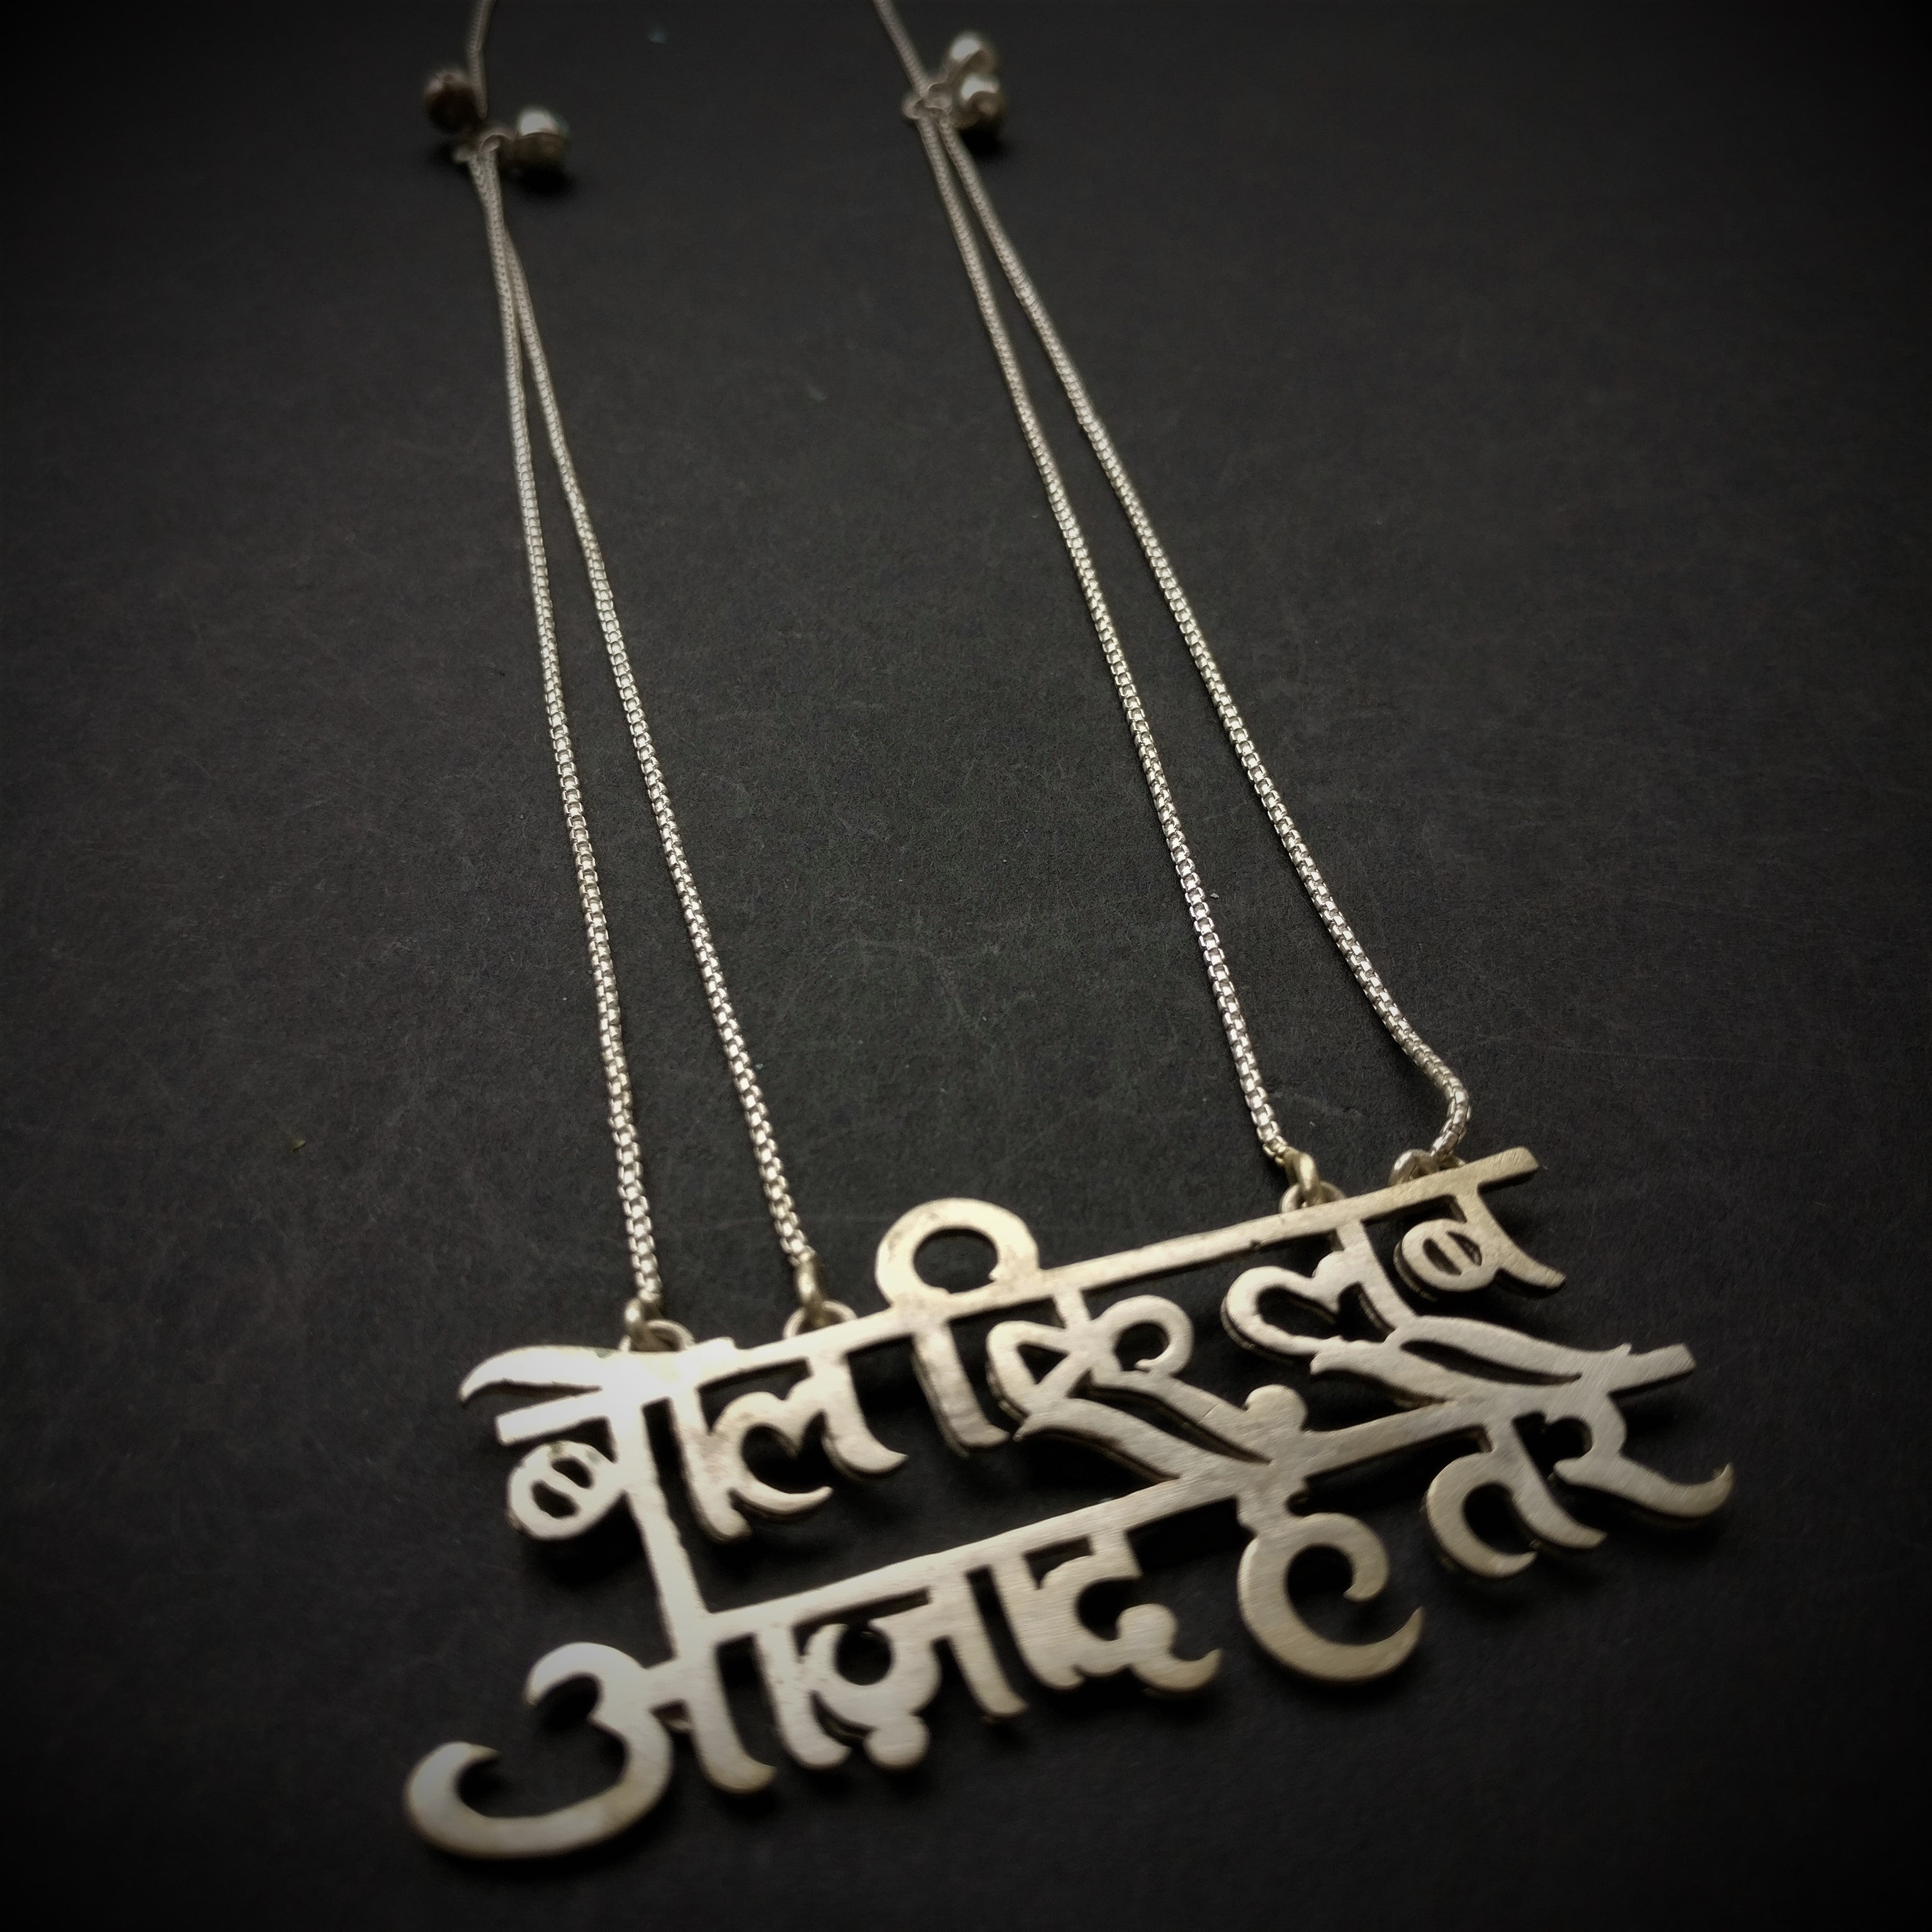 Poetic Charm: Lab Azaad Hai Tere Necklace by Quirksmith - Handcrafted in 92.5 Silver | Shark Tank India Featured Jewelry